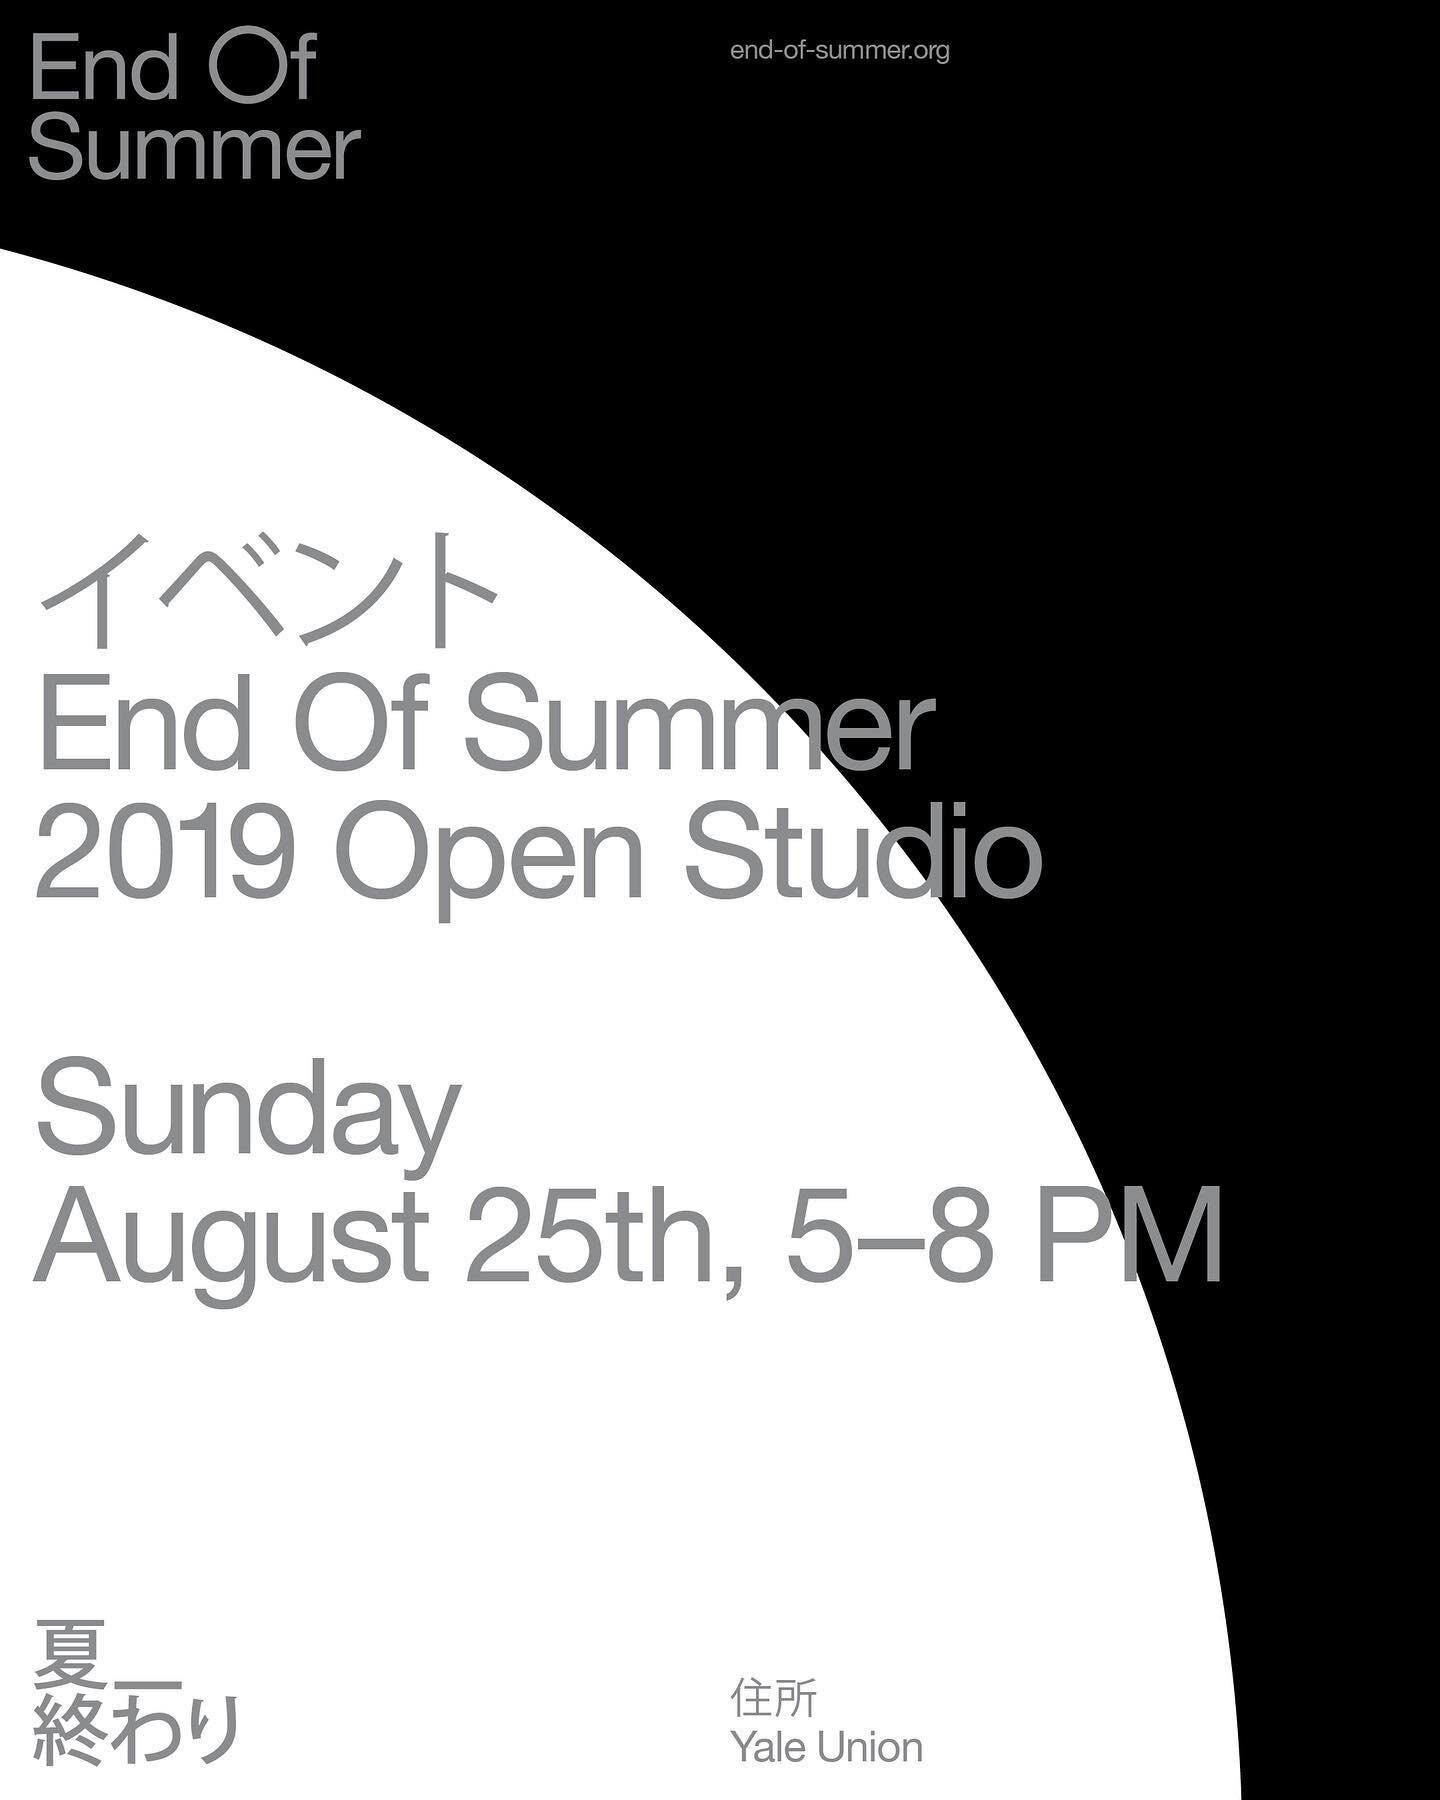 Join us this Sunday at Yale Union for our End of Summer Open Studio! Each of our six 2019 Artists in Residence will be showing research materials, new projects and works in progress from their time in Portland.